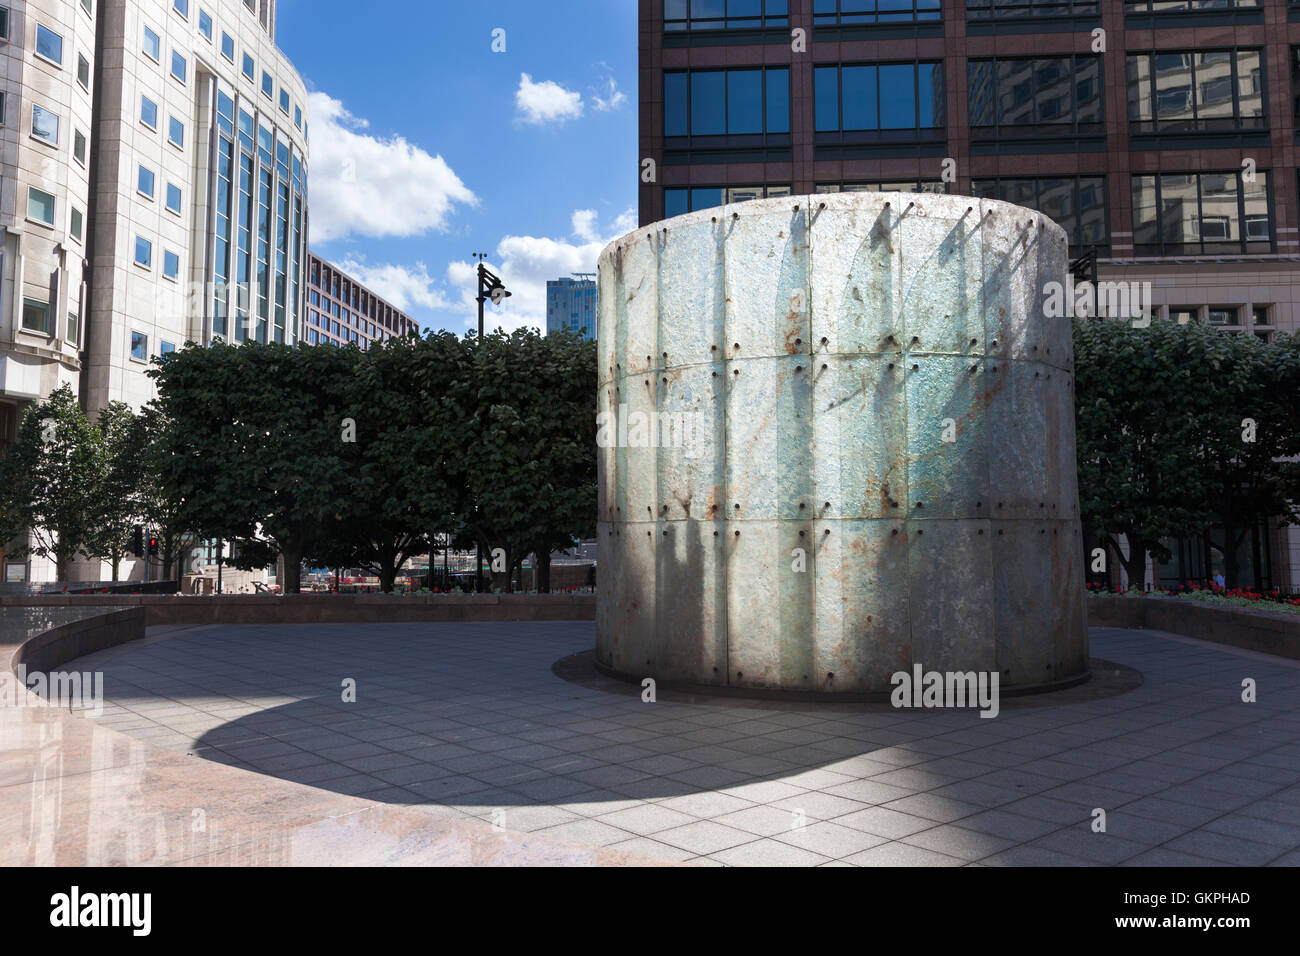 Cast Glass Panels by Jeff Bell, 1992, art in Canary Wharf, London, UK Stock Photo